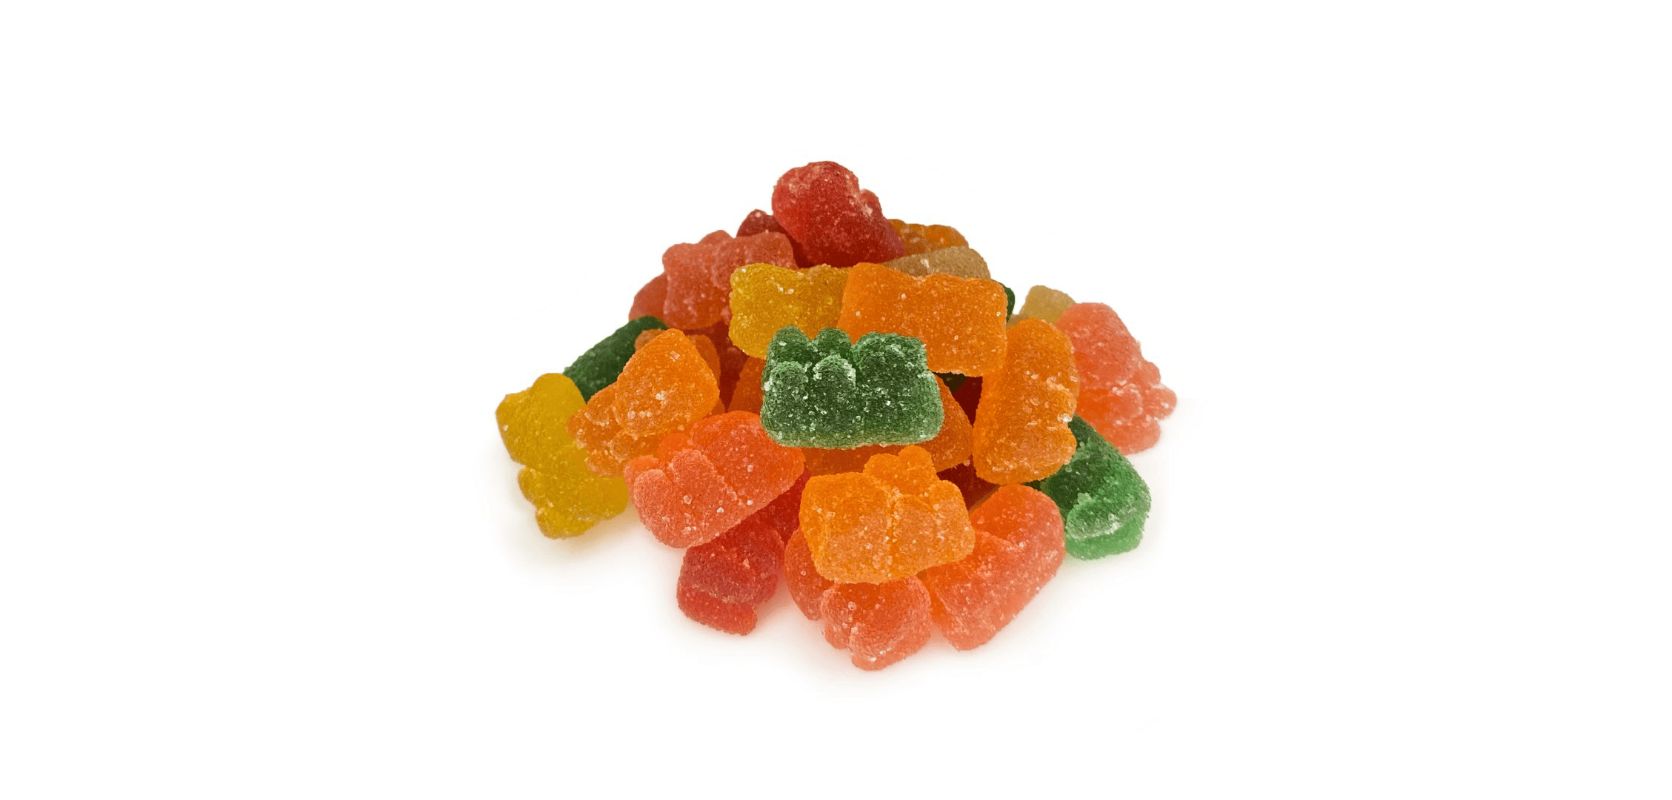 With the array of edible products available in Canada, choosing the best THC gummy can be tough. Fortunately, we've provided you with some helpful tips and tricks to make sure you buy weed online safely: